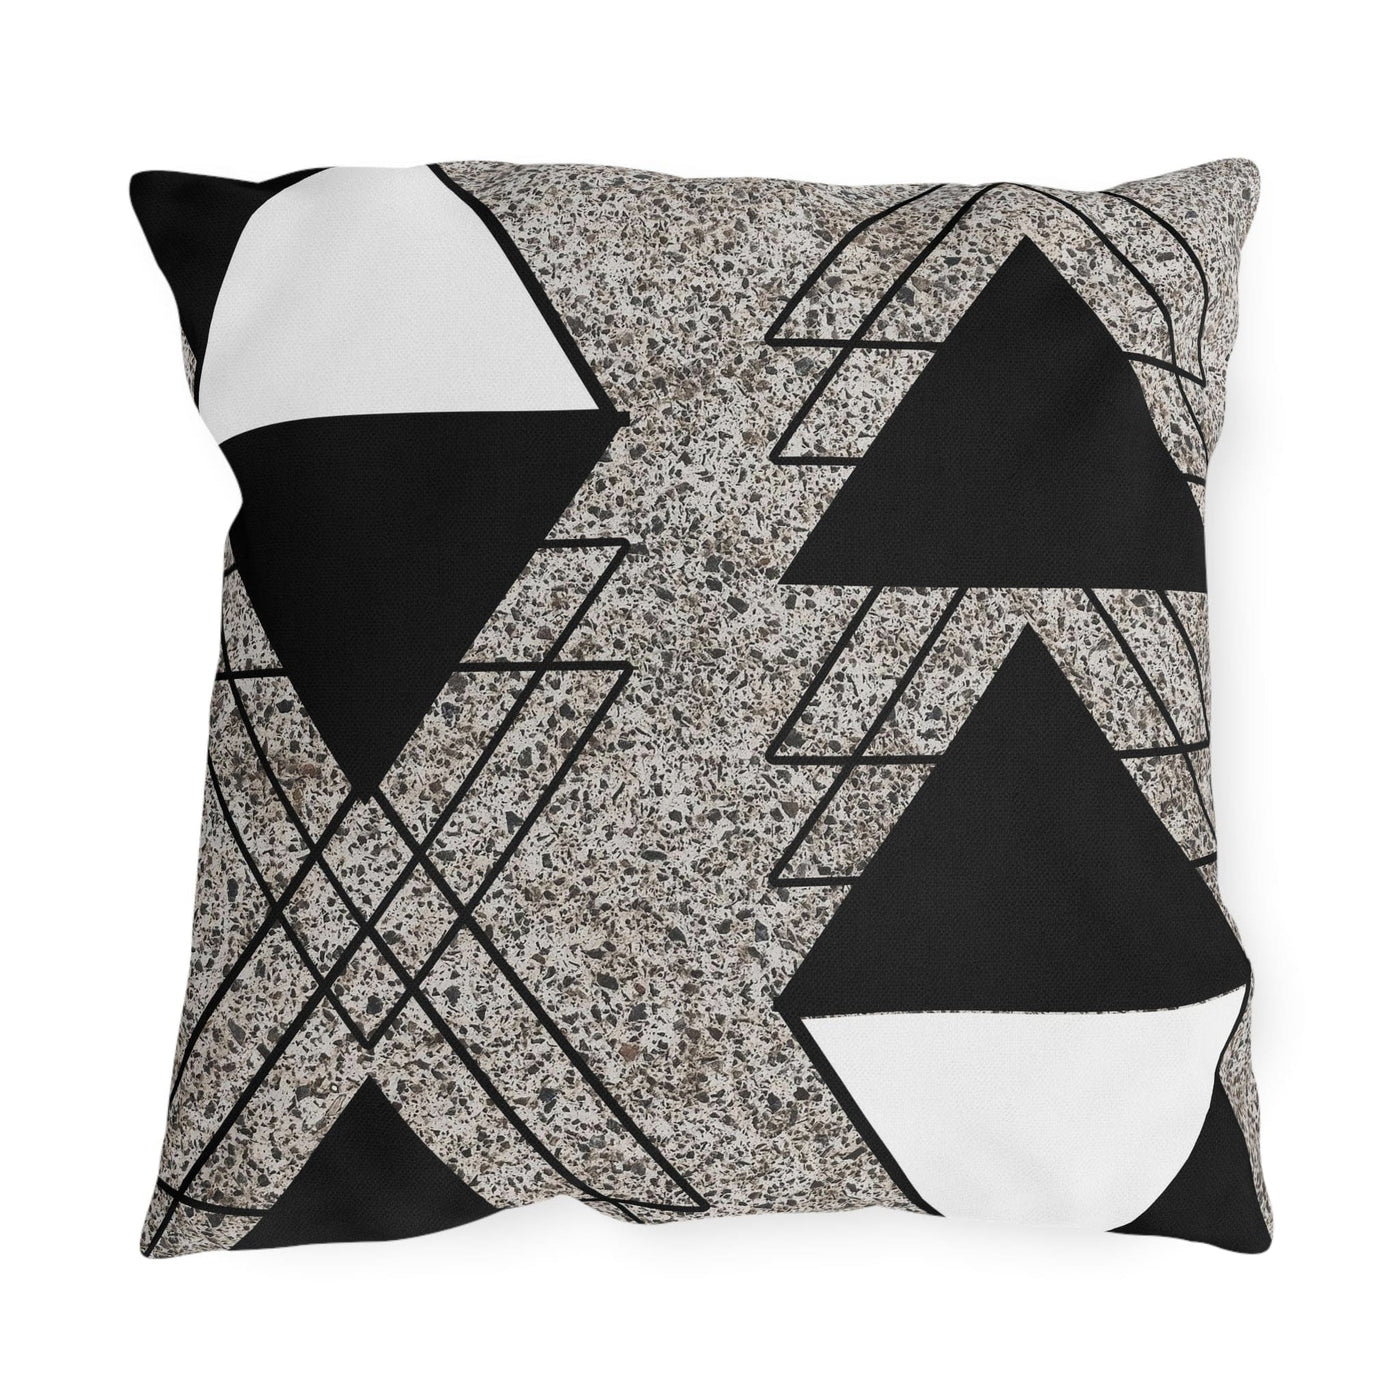 Decorative Outdoor Pillows With Zipper - Set Of 2 Black And White Triangular